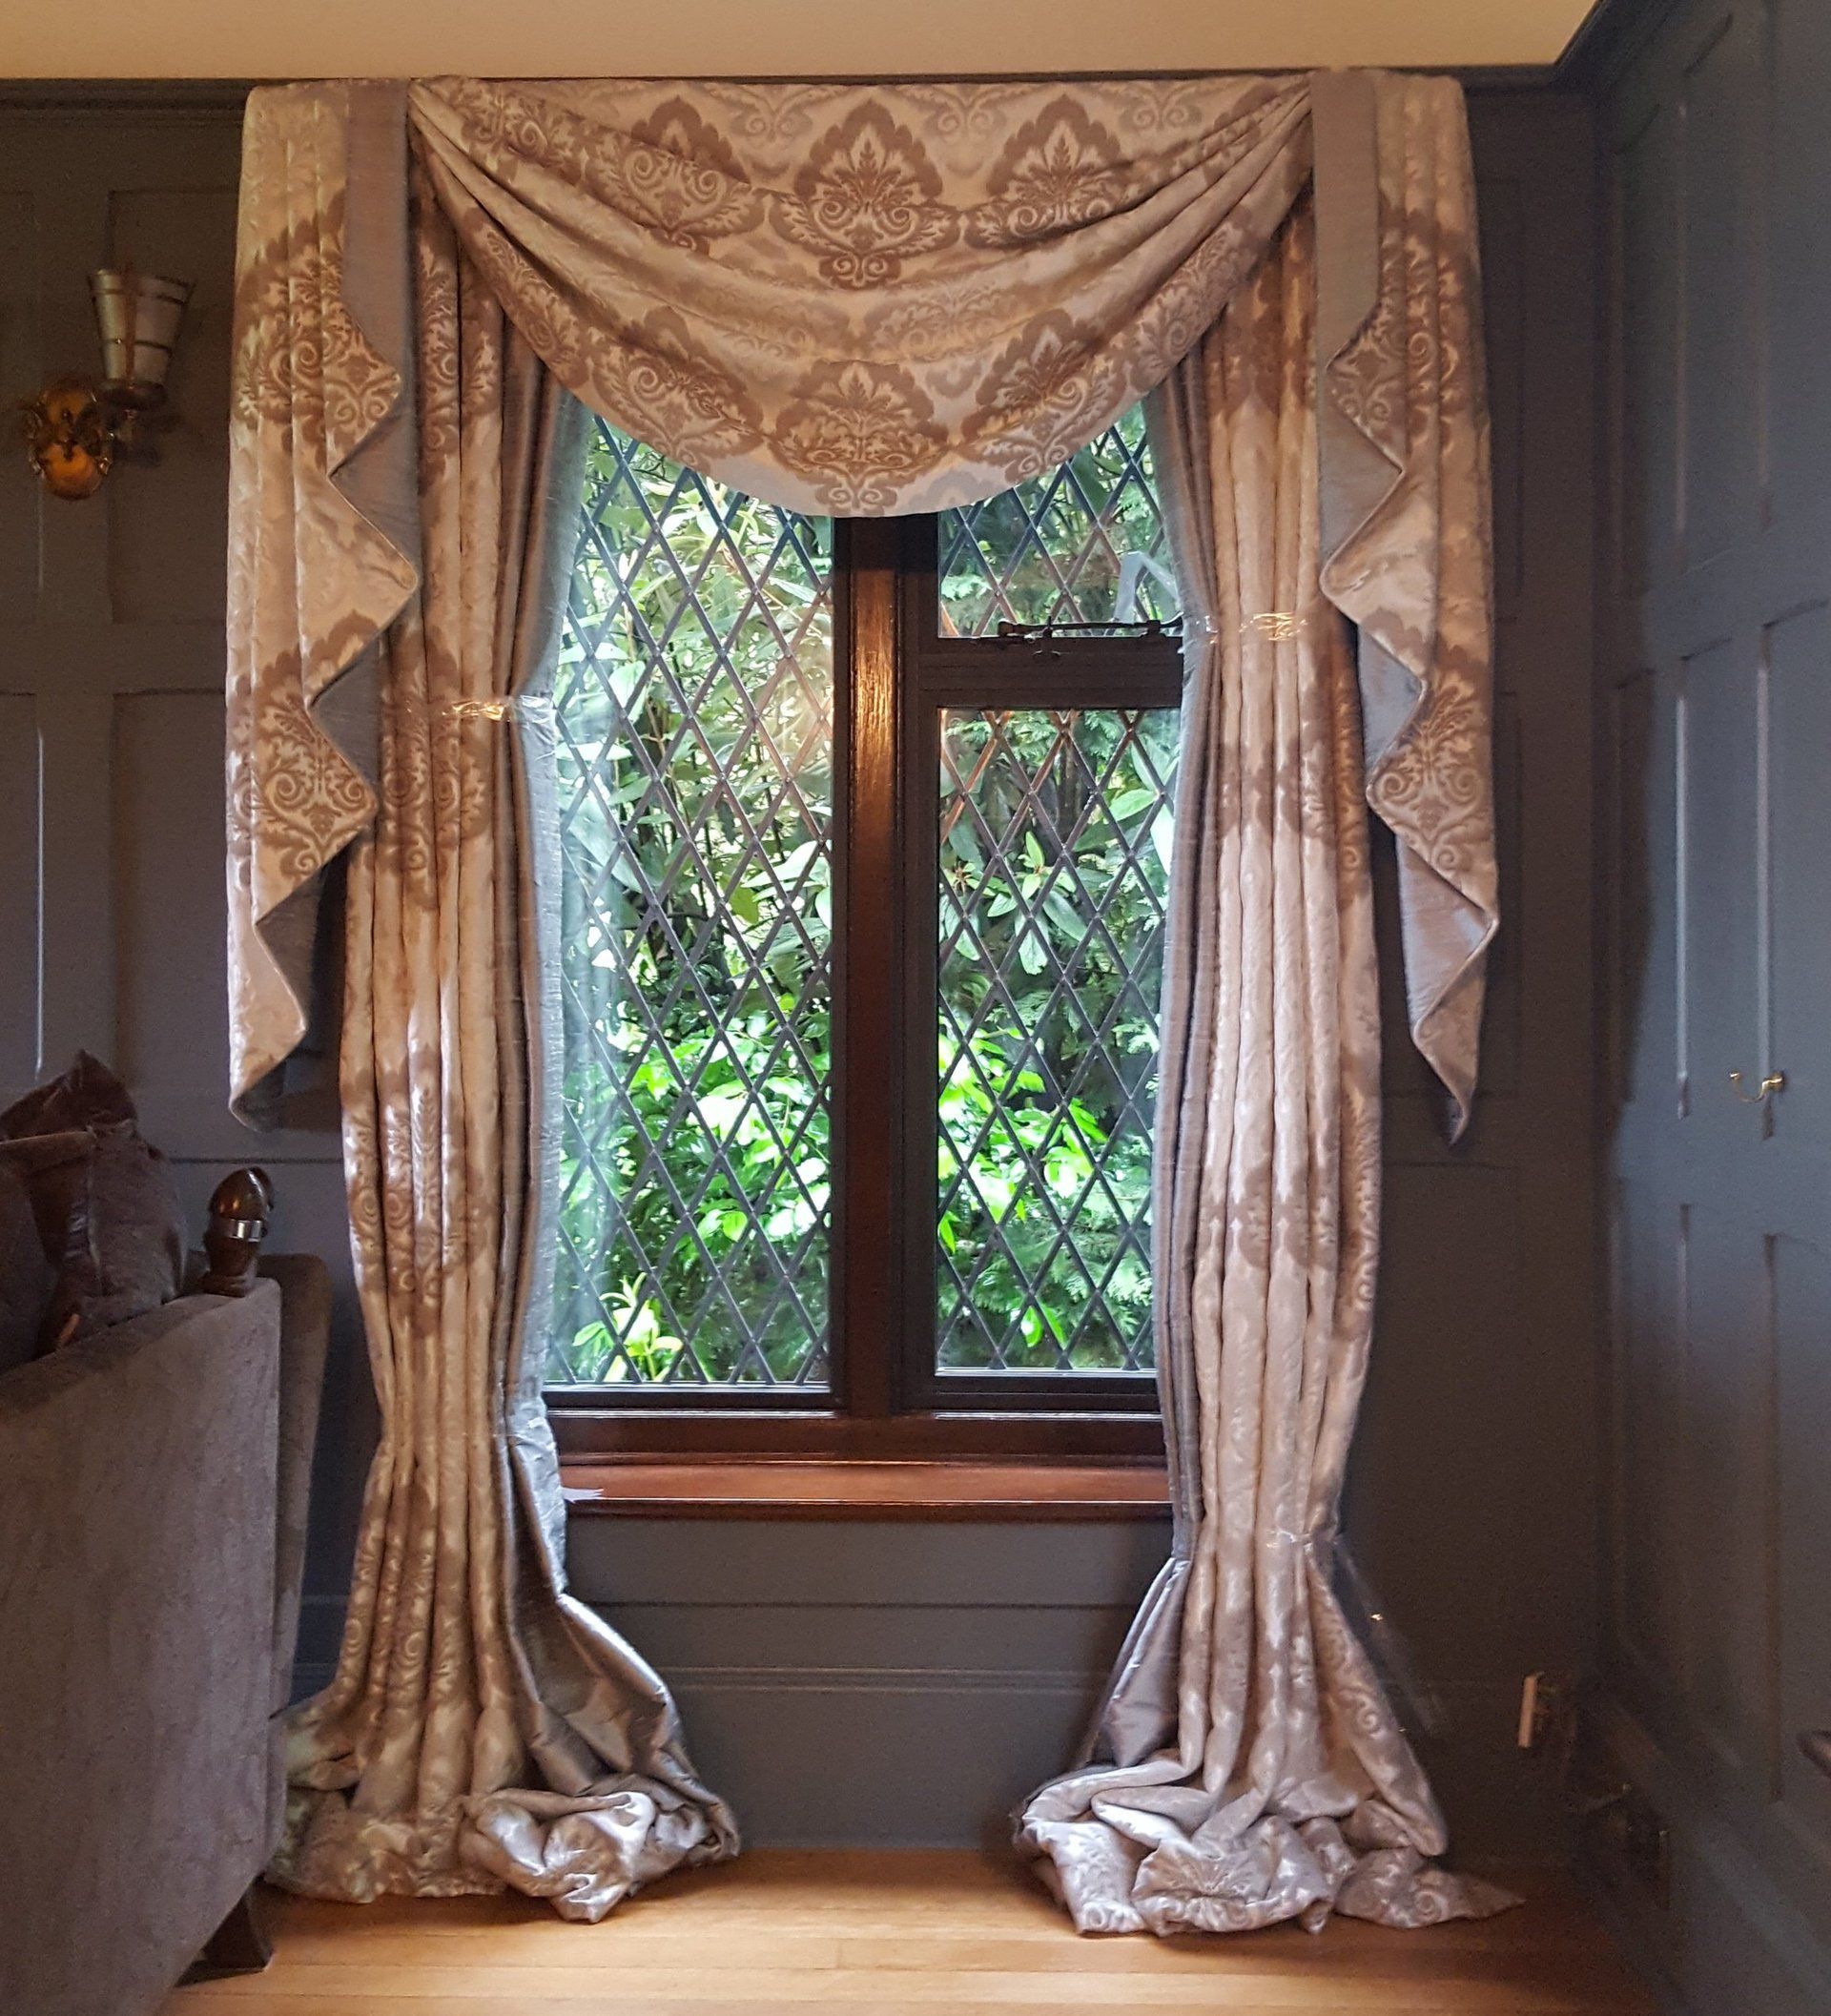 Bespoke Hand Made Curtains produced with care & attention to detail in beautiful fabrics